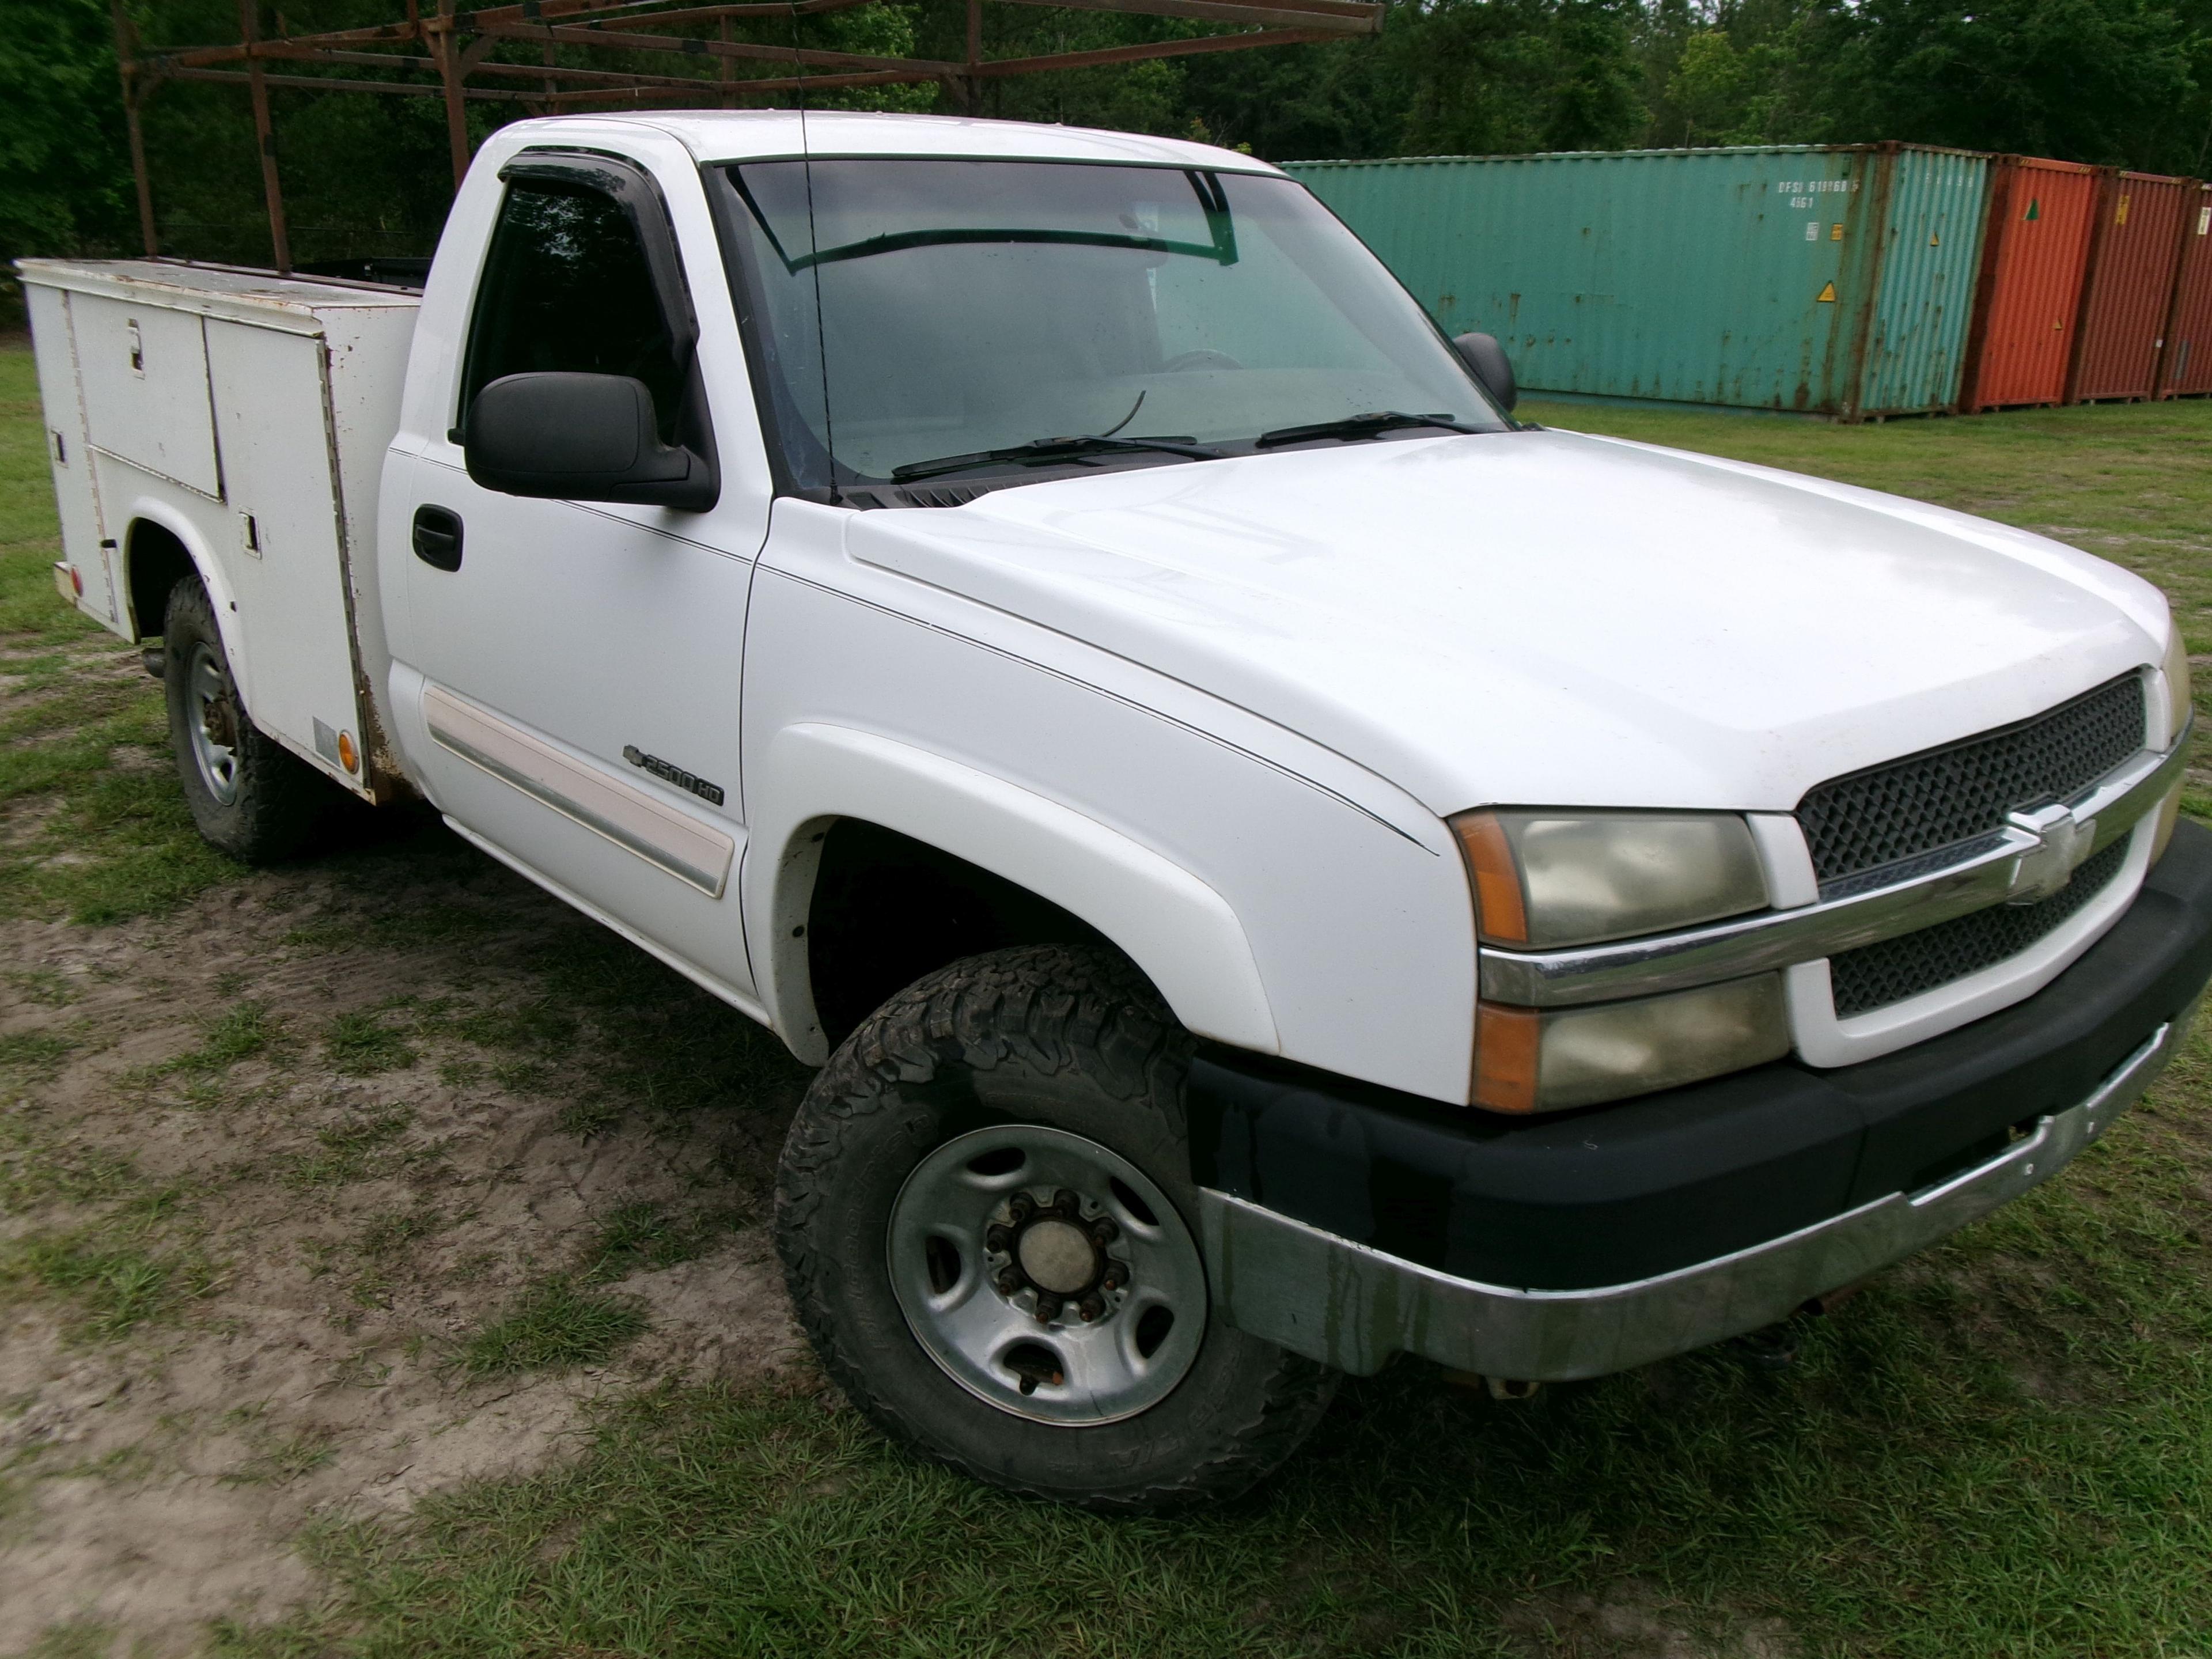 (0547)  2003 CHEVY 2500HD SERVICE TRUCK W/TITLE